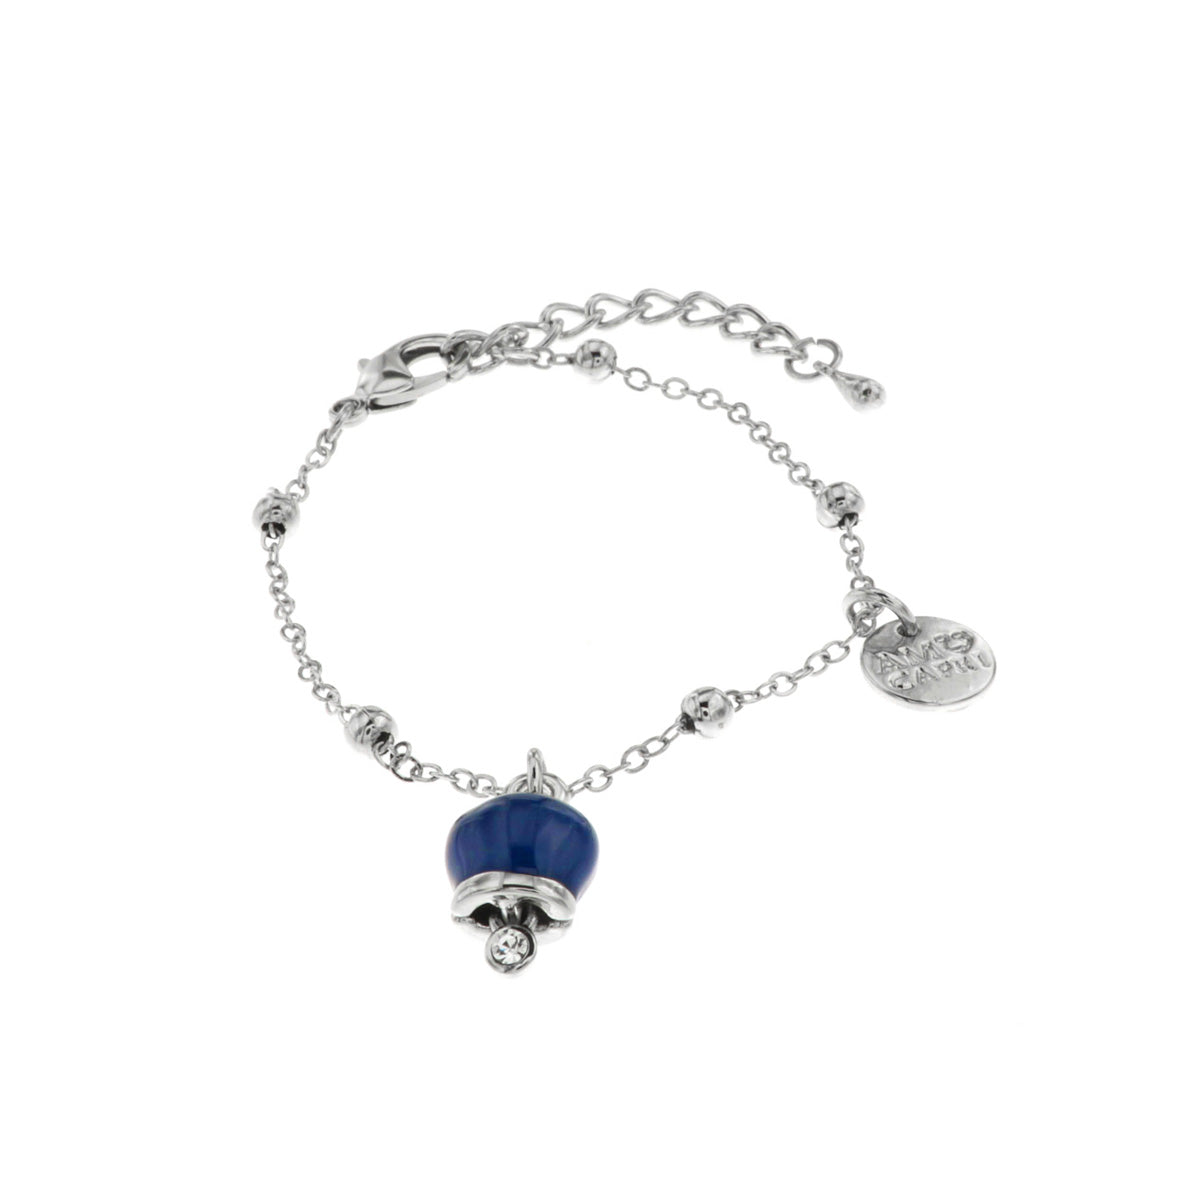 Metal bracelet with pendant charm bell, embellished with blue enamel and light point